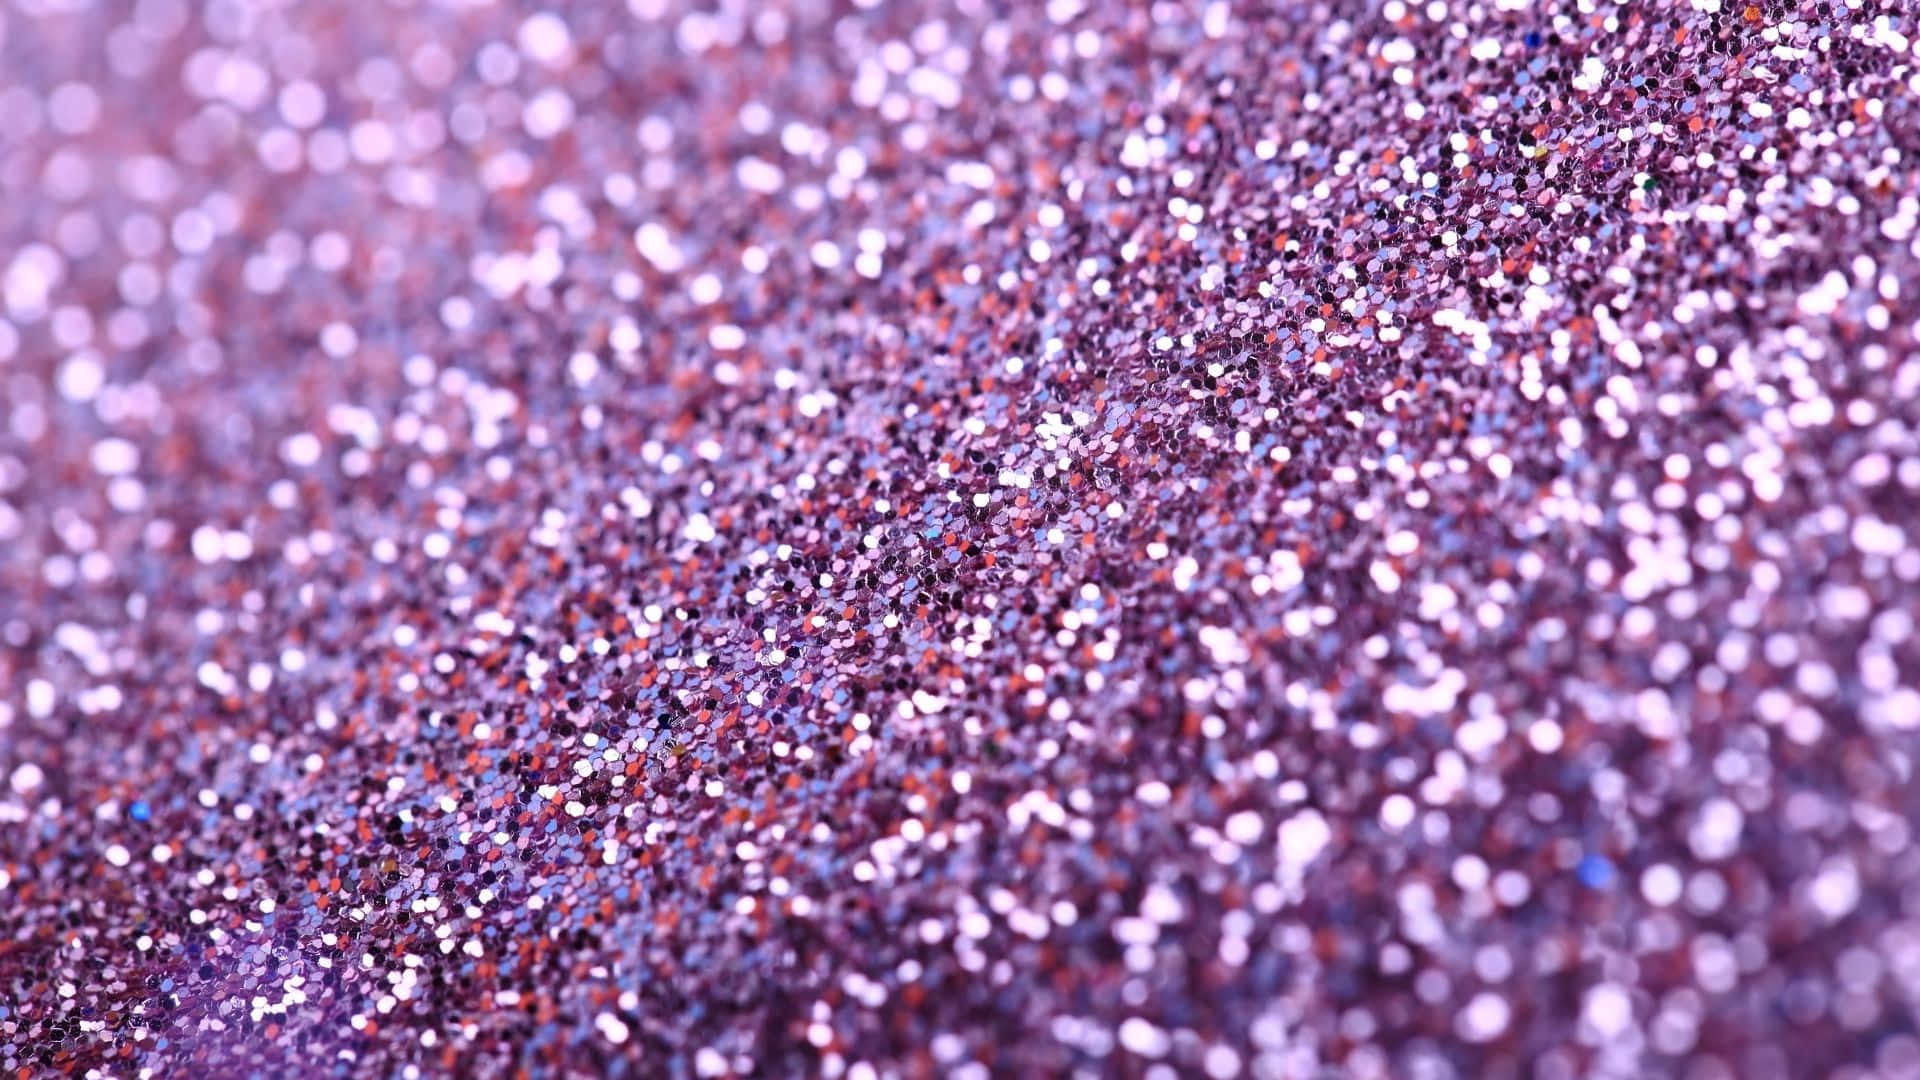 Let your dreams sparkle with Purple Glitter! Wallpaper